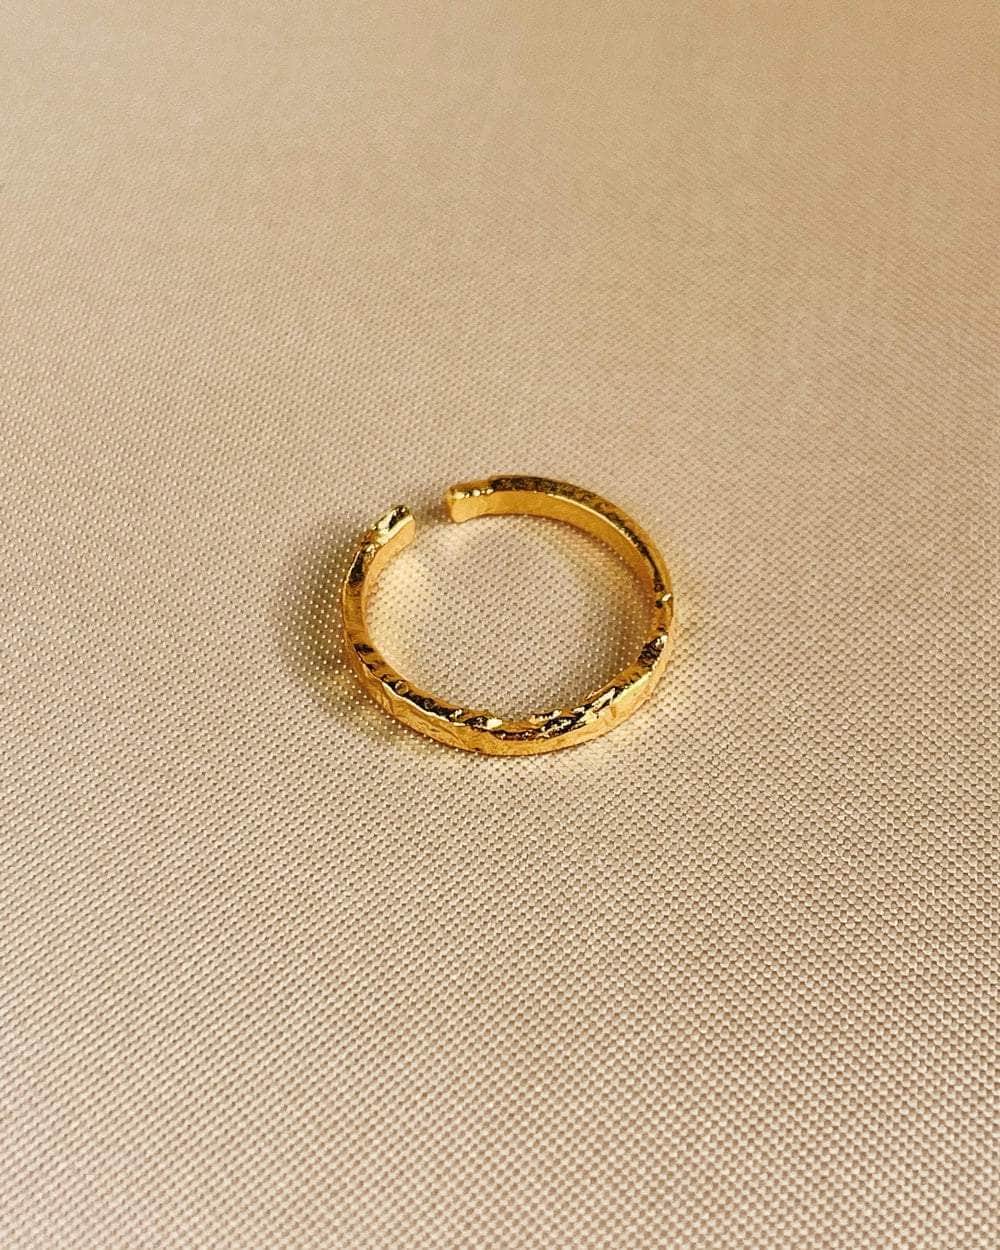 So Dainty Co. Rings Evelyn Gold Ring Gold Plated 925 Sterling Silver Jewelry